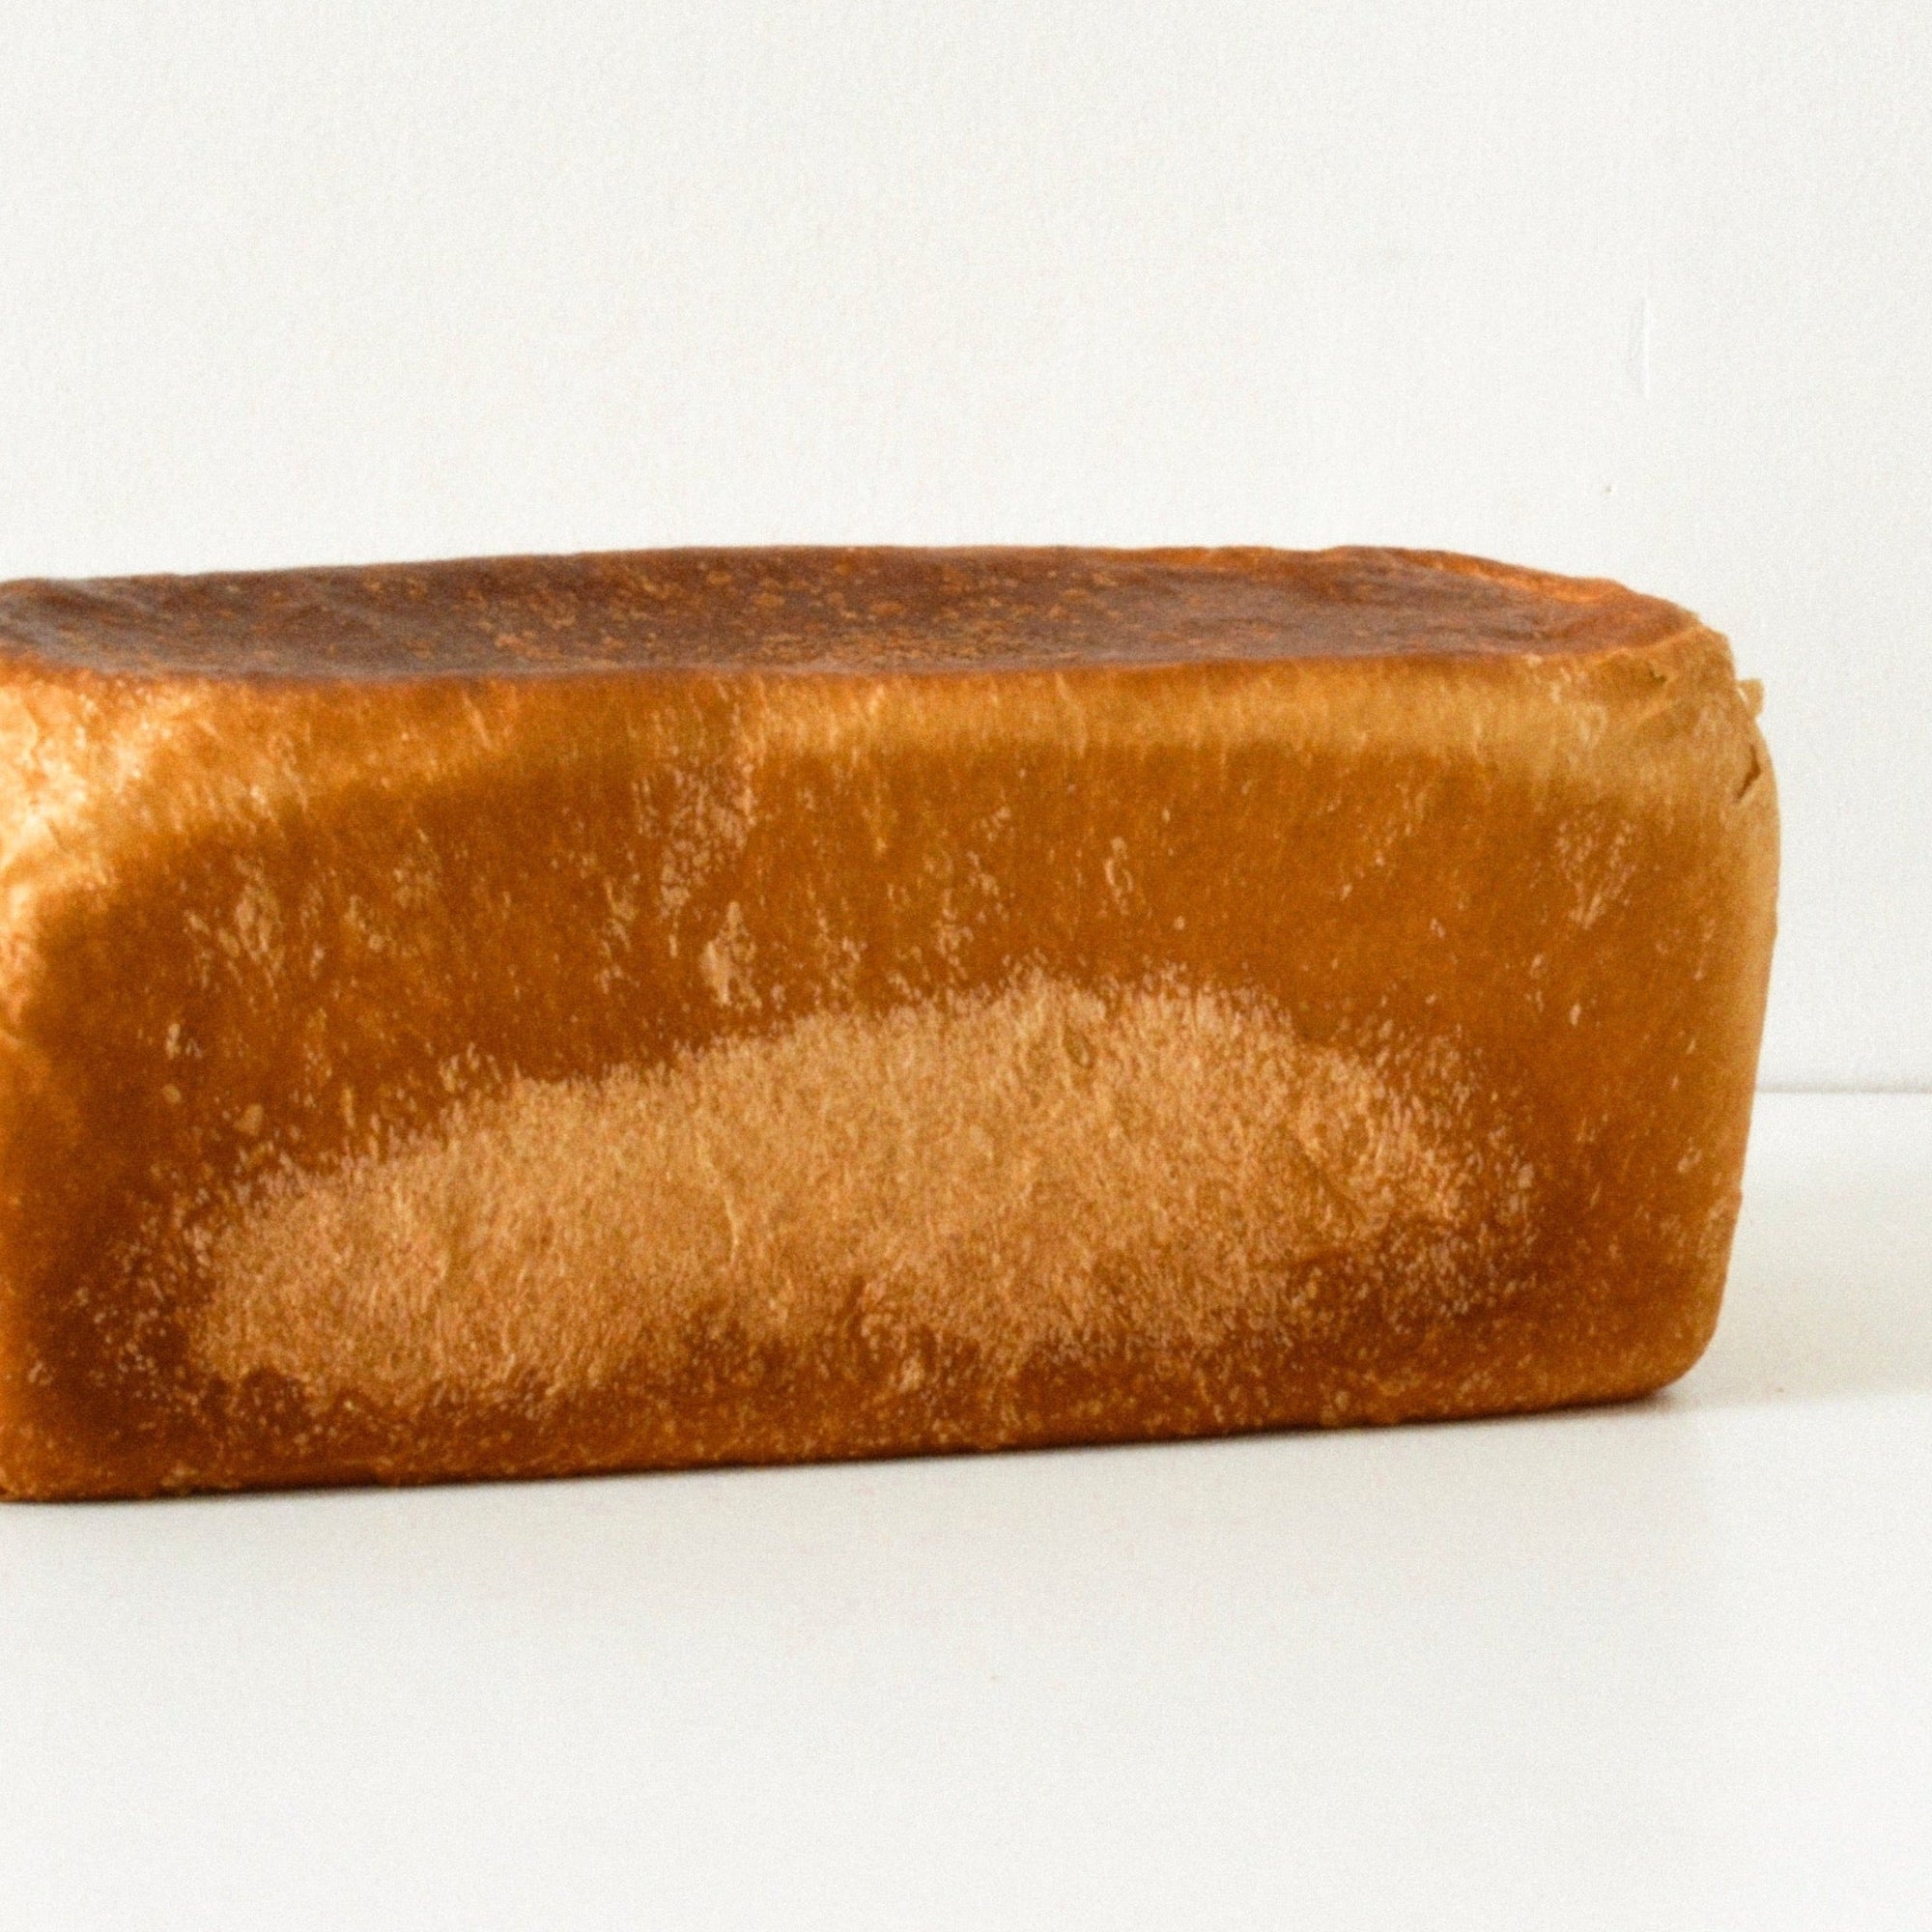 full image of the white loaf which shows texture